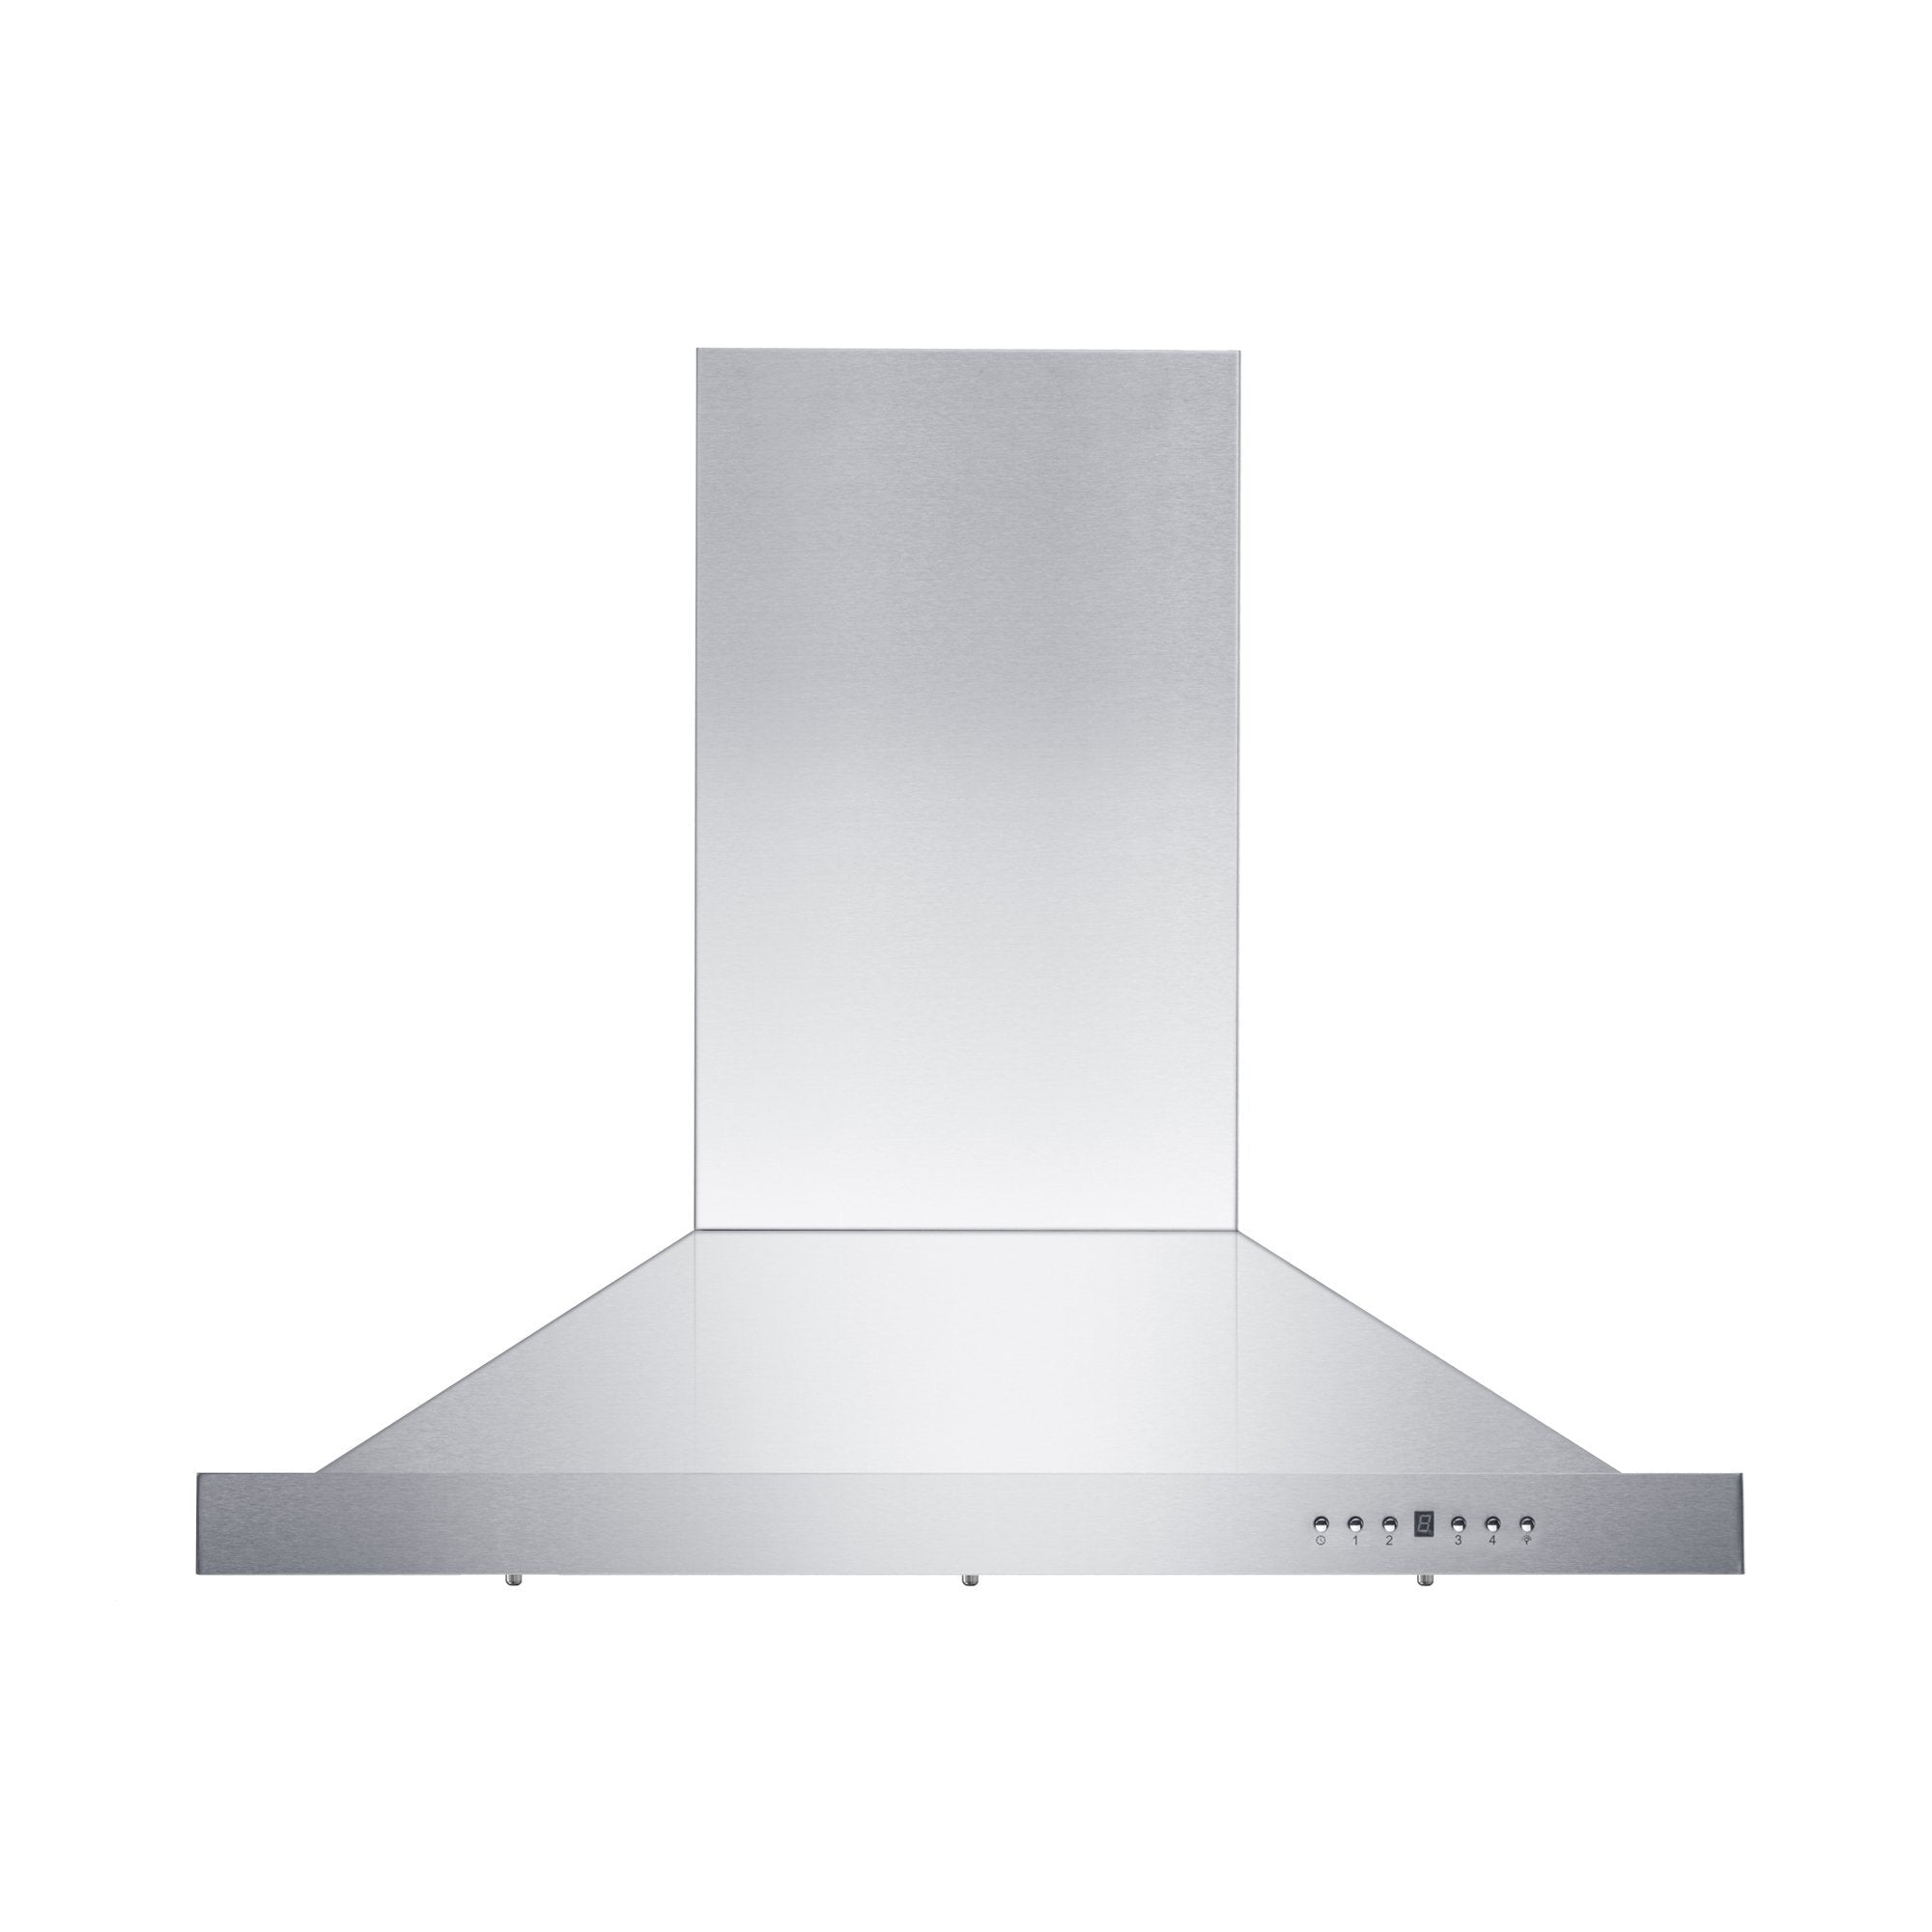 48" Convertible Vent Island Mount Range Hood in Stainless Steel (GL2i-48)